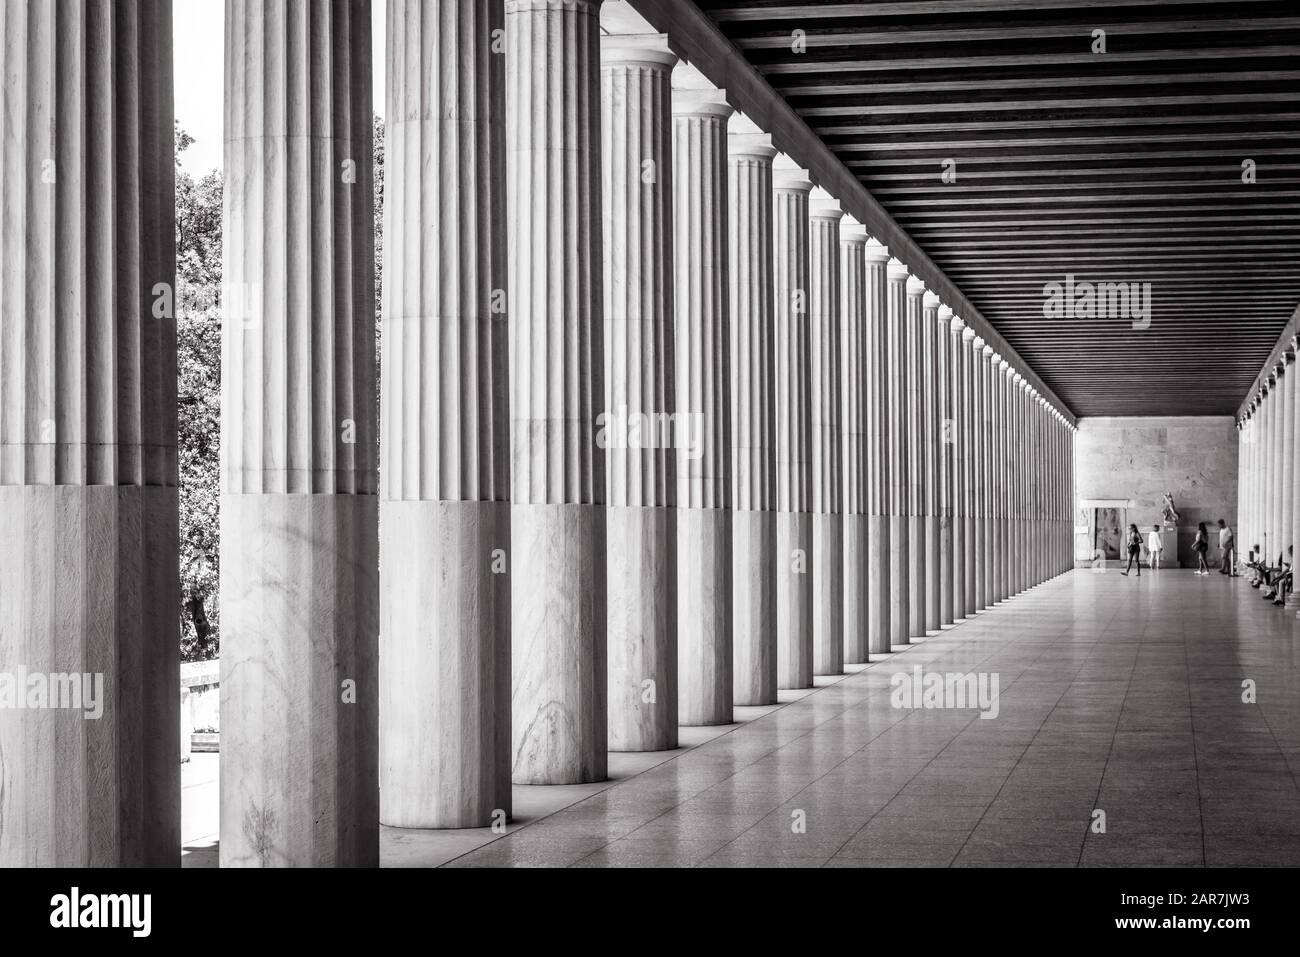 Stoa of Attalos in Agora, Athens, Greece. It is one of the main tourist attractions of Athens. Panoramic view of Stoa columns with perspective. Histor Stock Photo